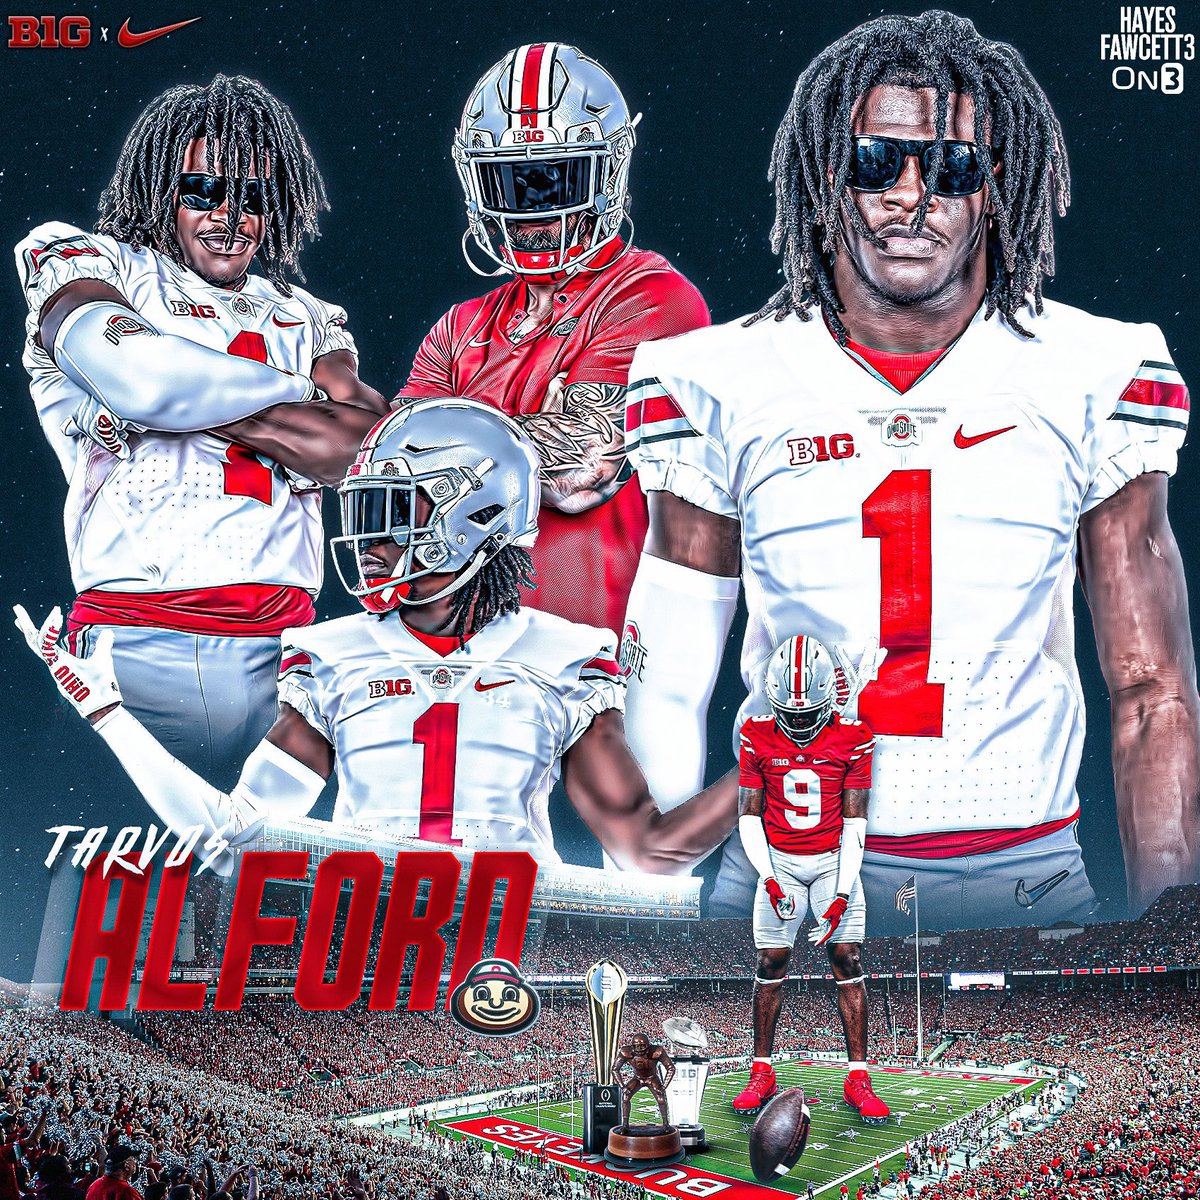 4⭐️LB Tarvos ‘TJ’ Alford II has committed to @OhioStateFB 🎉🎉🎉🎉🎉🎉🎉🎉🎉🎉🎉🎉🎉🎉🎉🎉🎉🎉🎉🎉🎉🎉🎉🎉🎉🎉🎉🎉🎉🎉🎉 Athletic Versatile Explosive & physical Big hitter Great instincts QB of the defense Monster against the run Explosive blitzer Great open field tackler